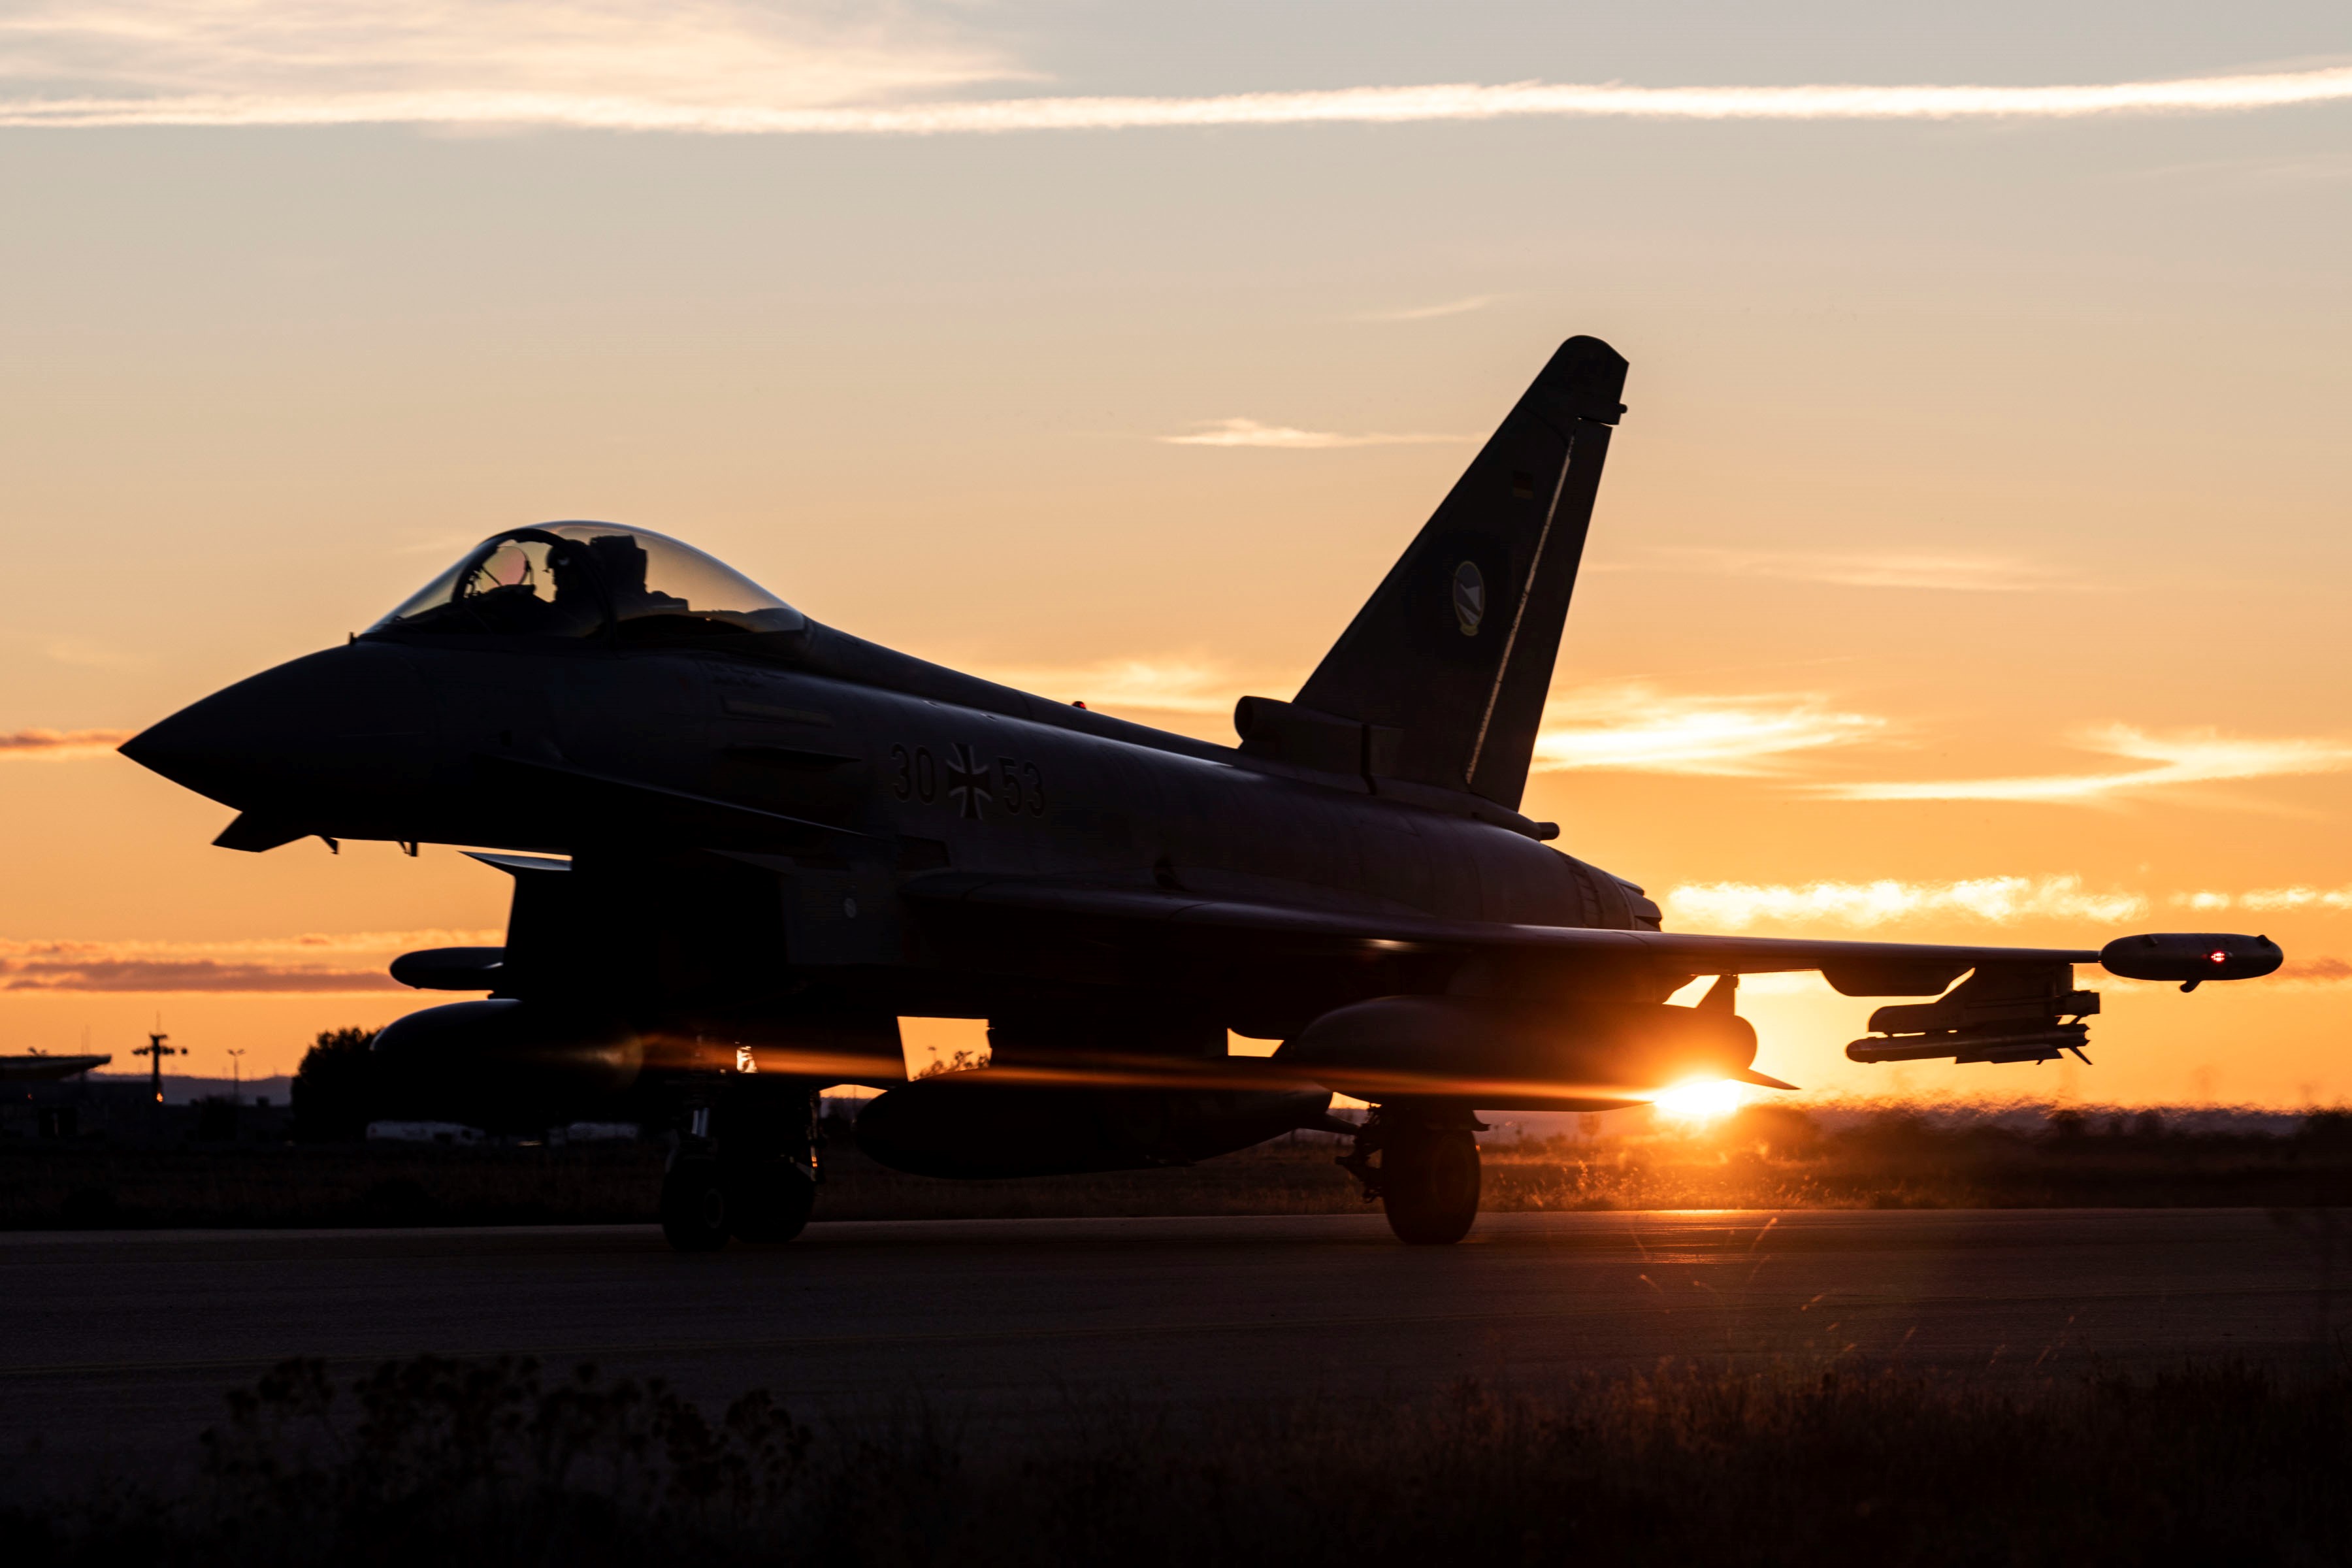 Fighter aircraft on the ground, during sunset.